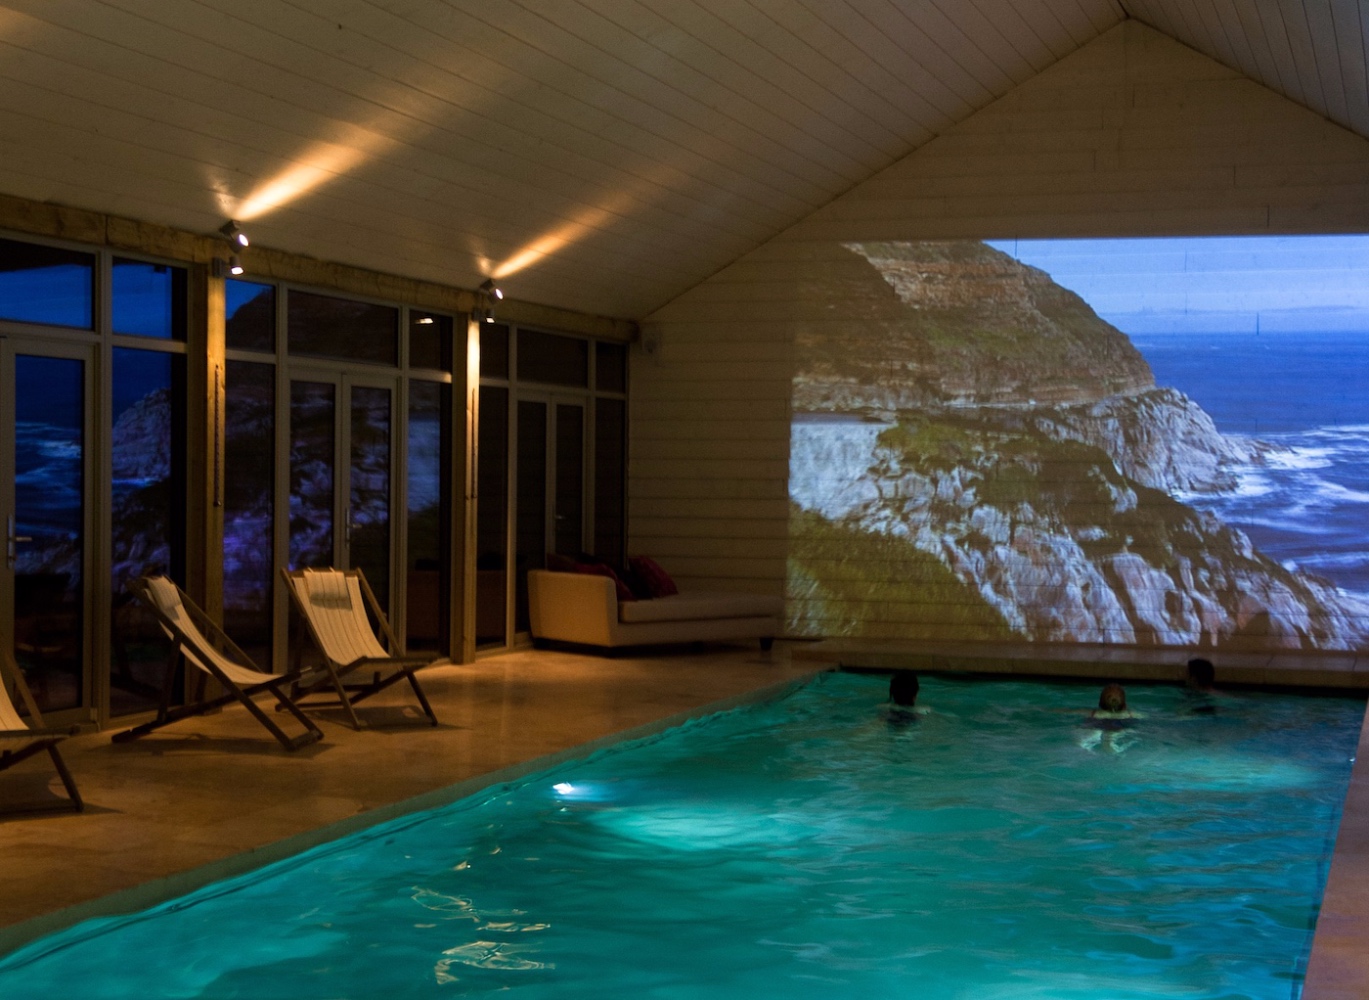 Swimming while Watching a Movie